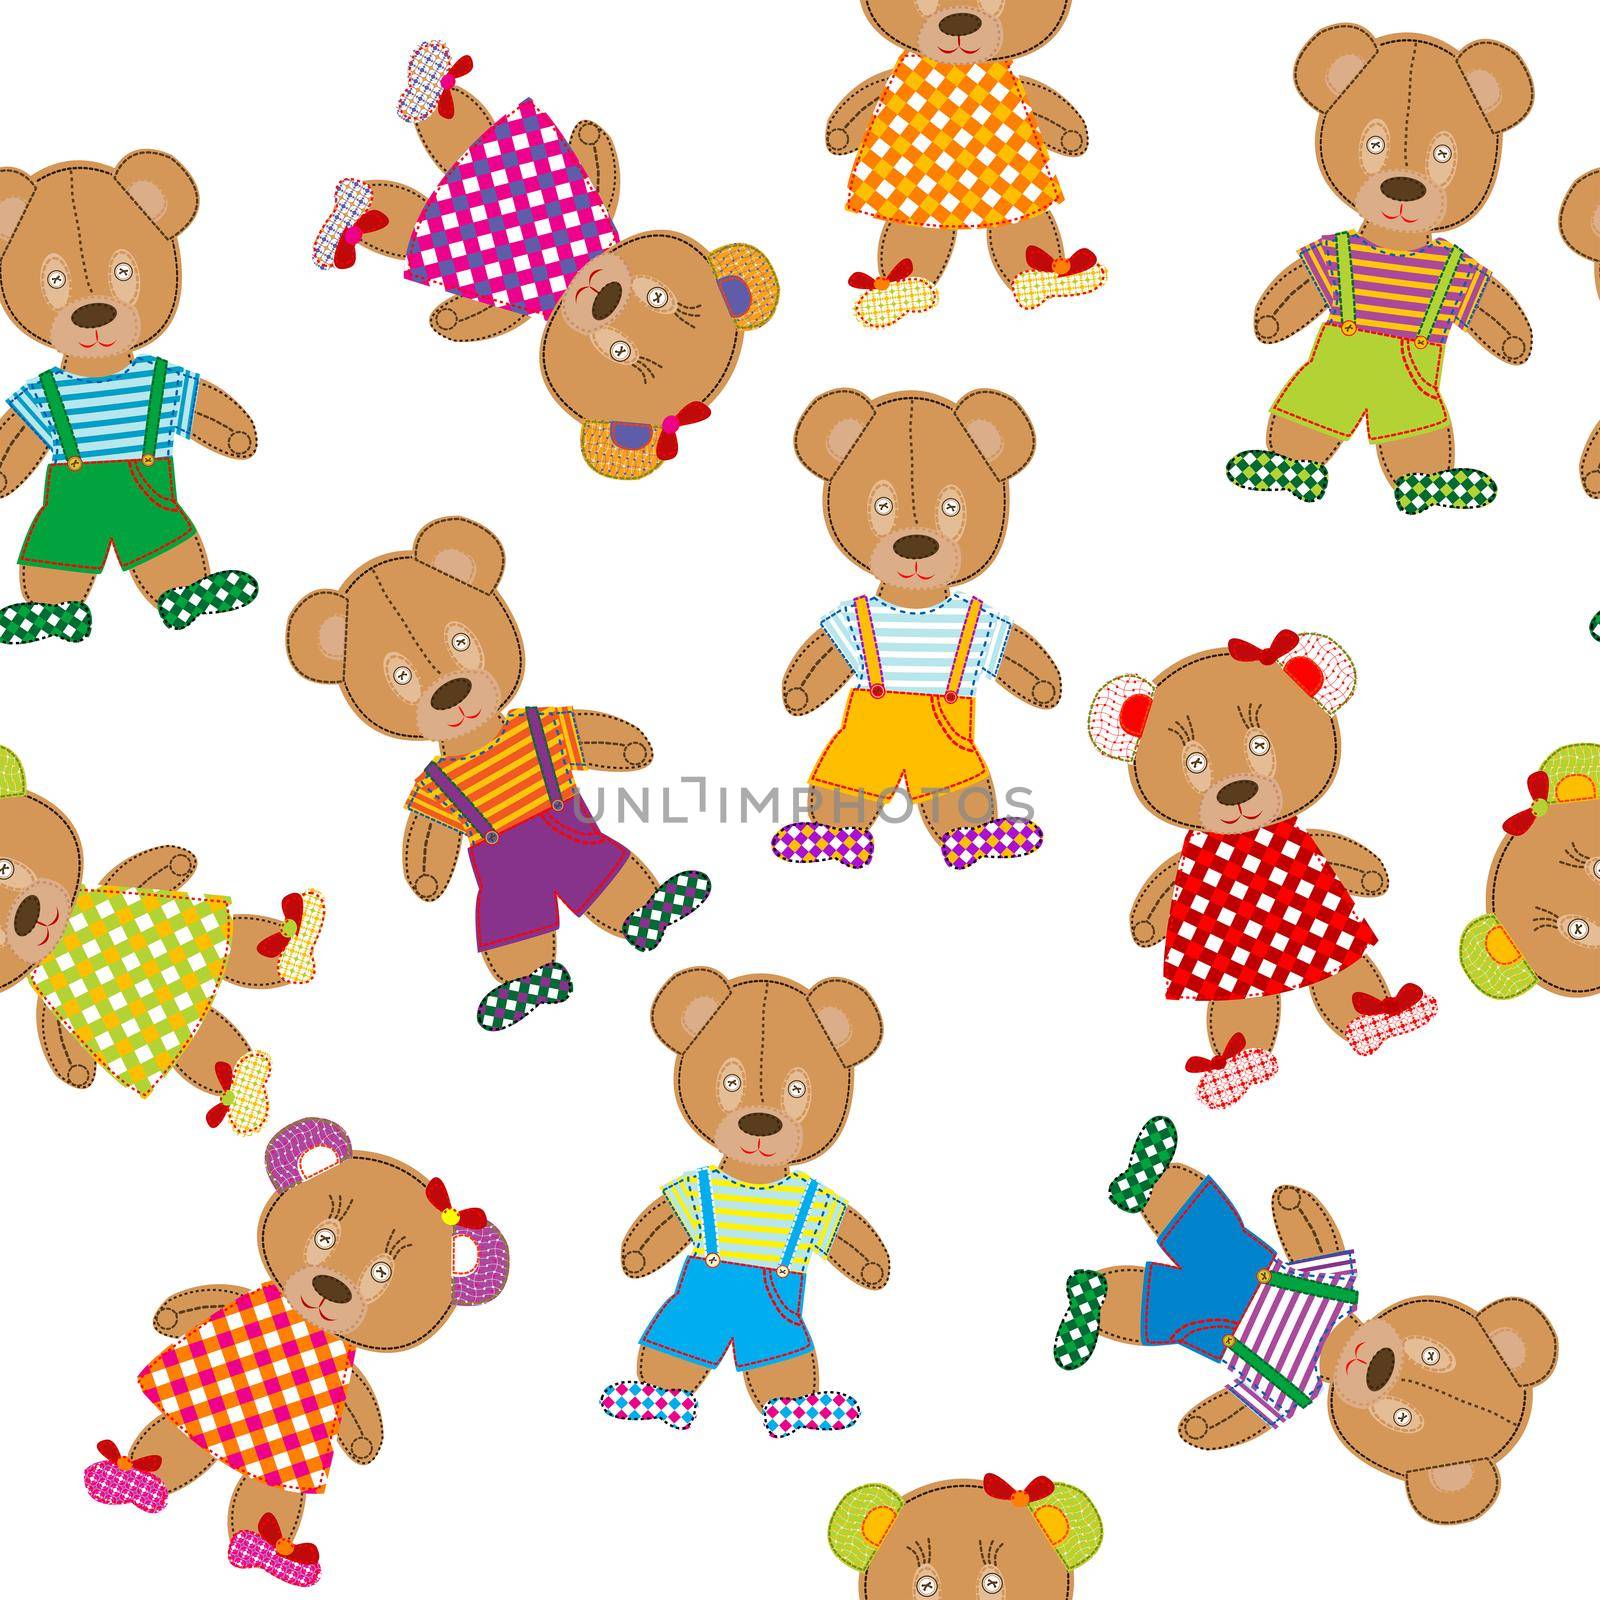 Seamless pattern with teddy bears on white background by hibrida13